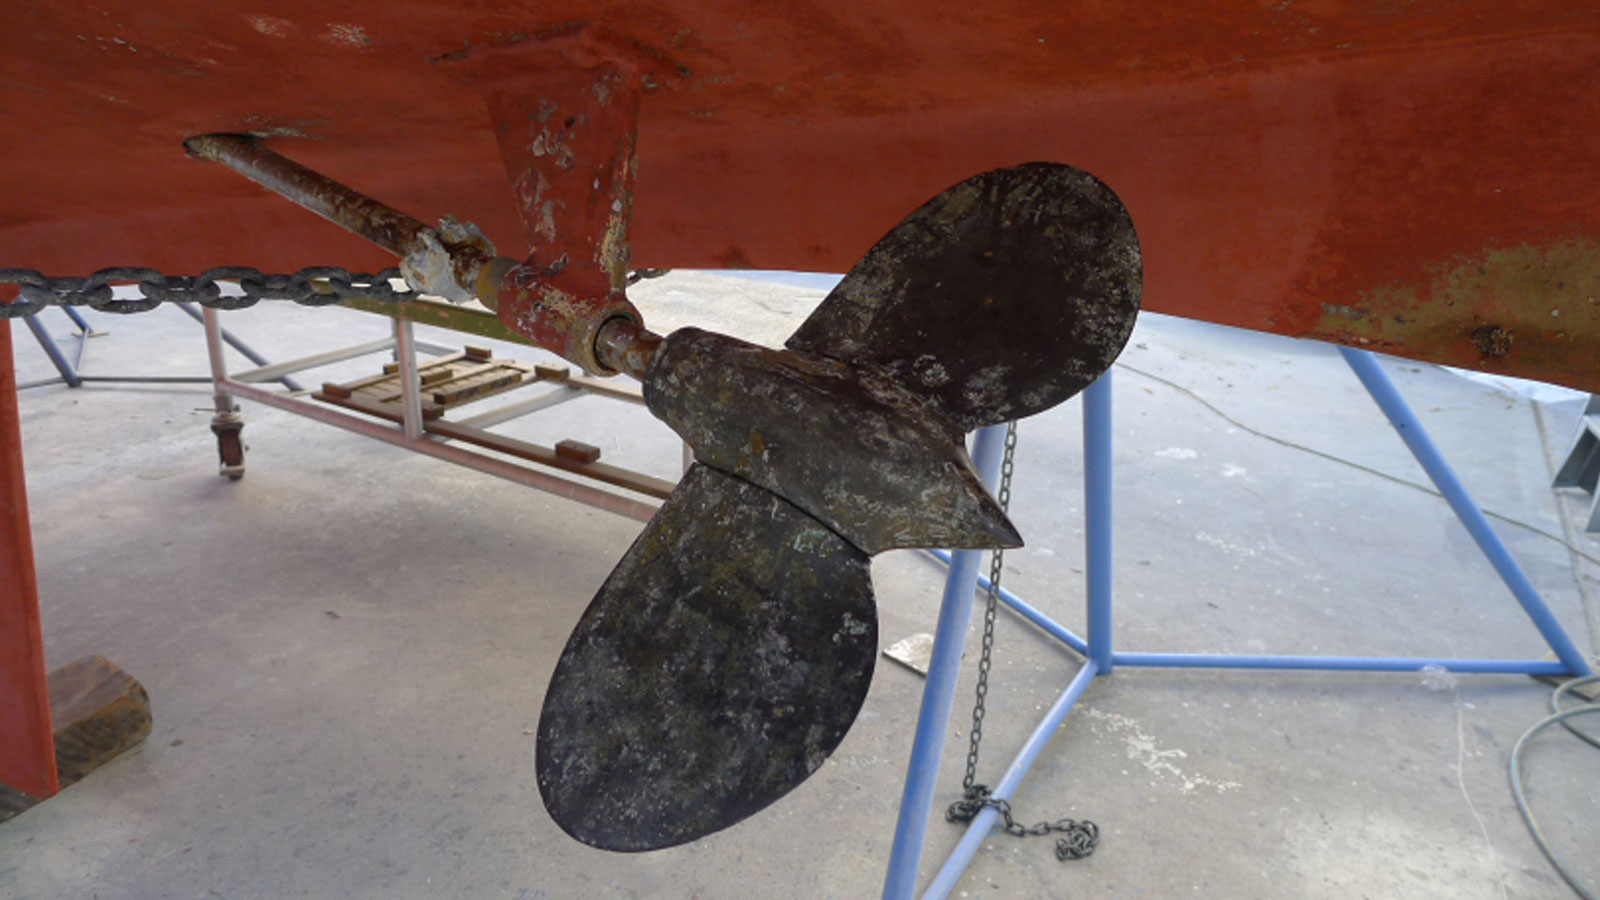 Corrosion is seen on a propeller and shaft